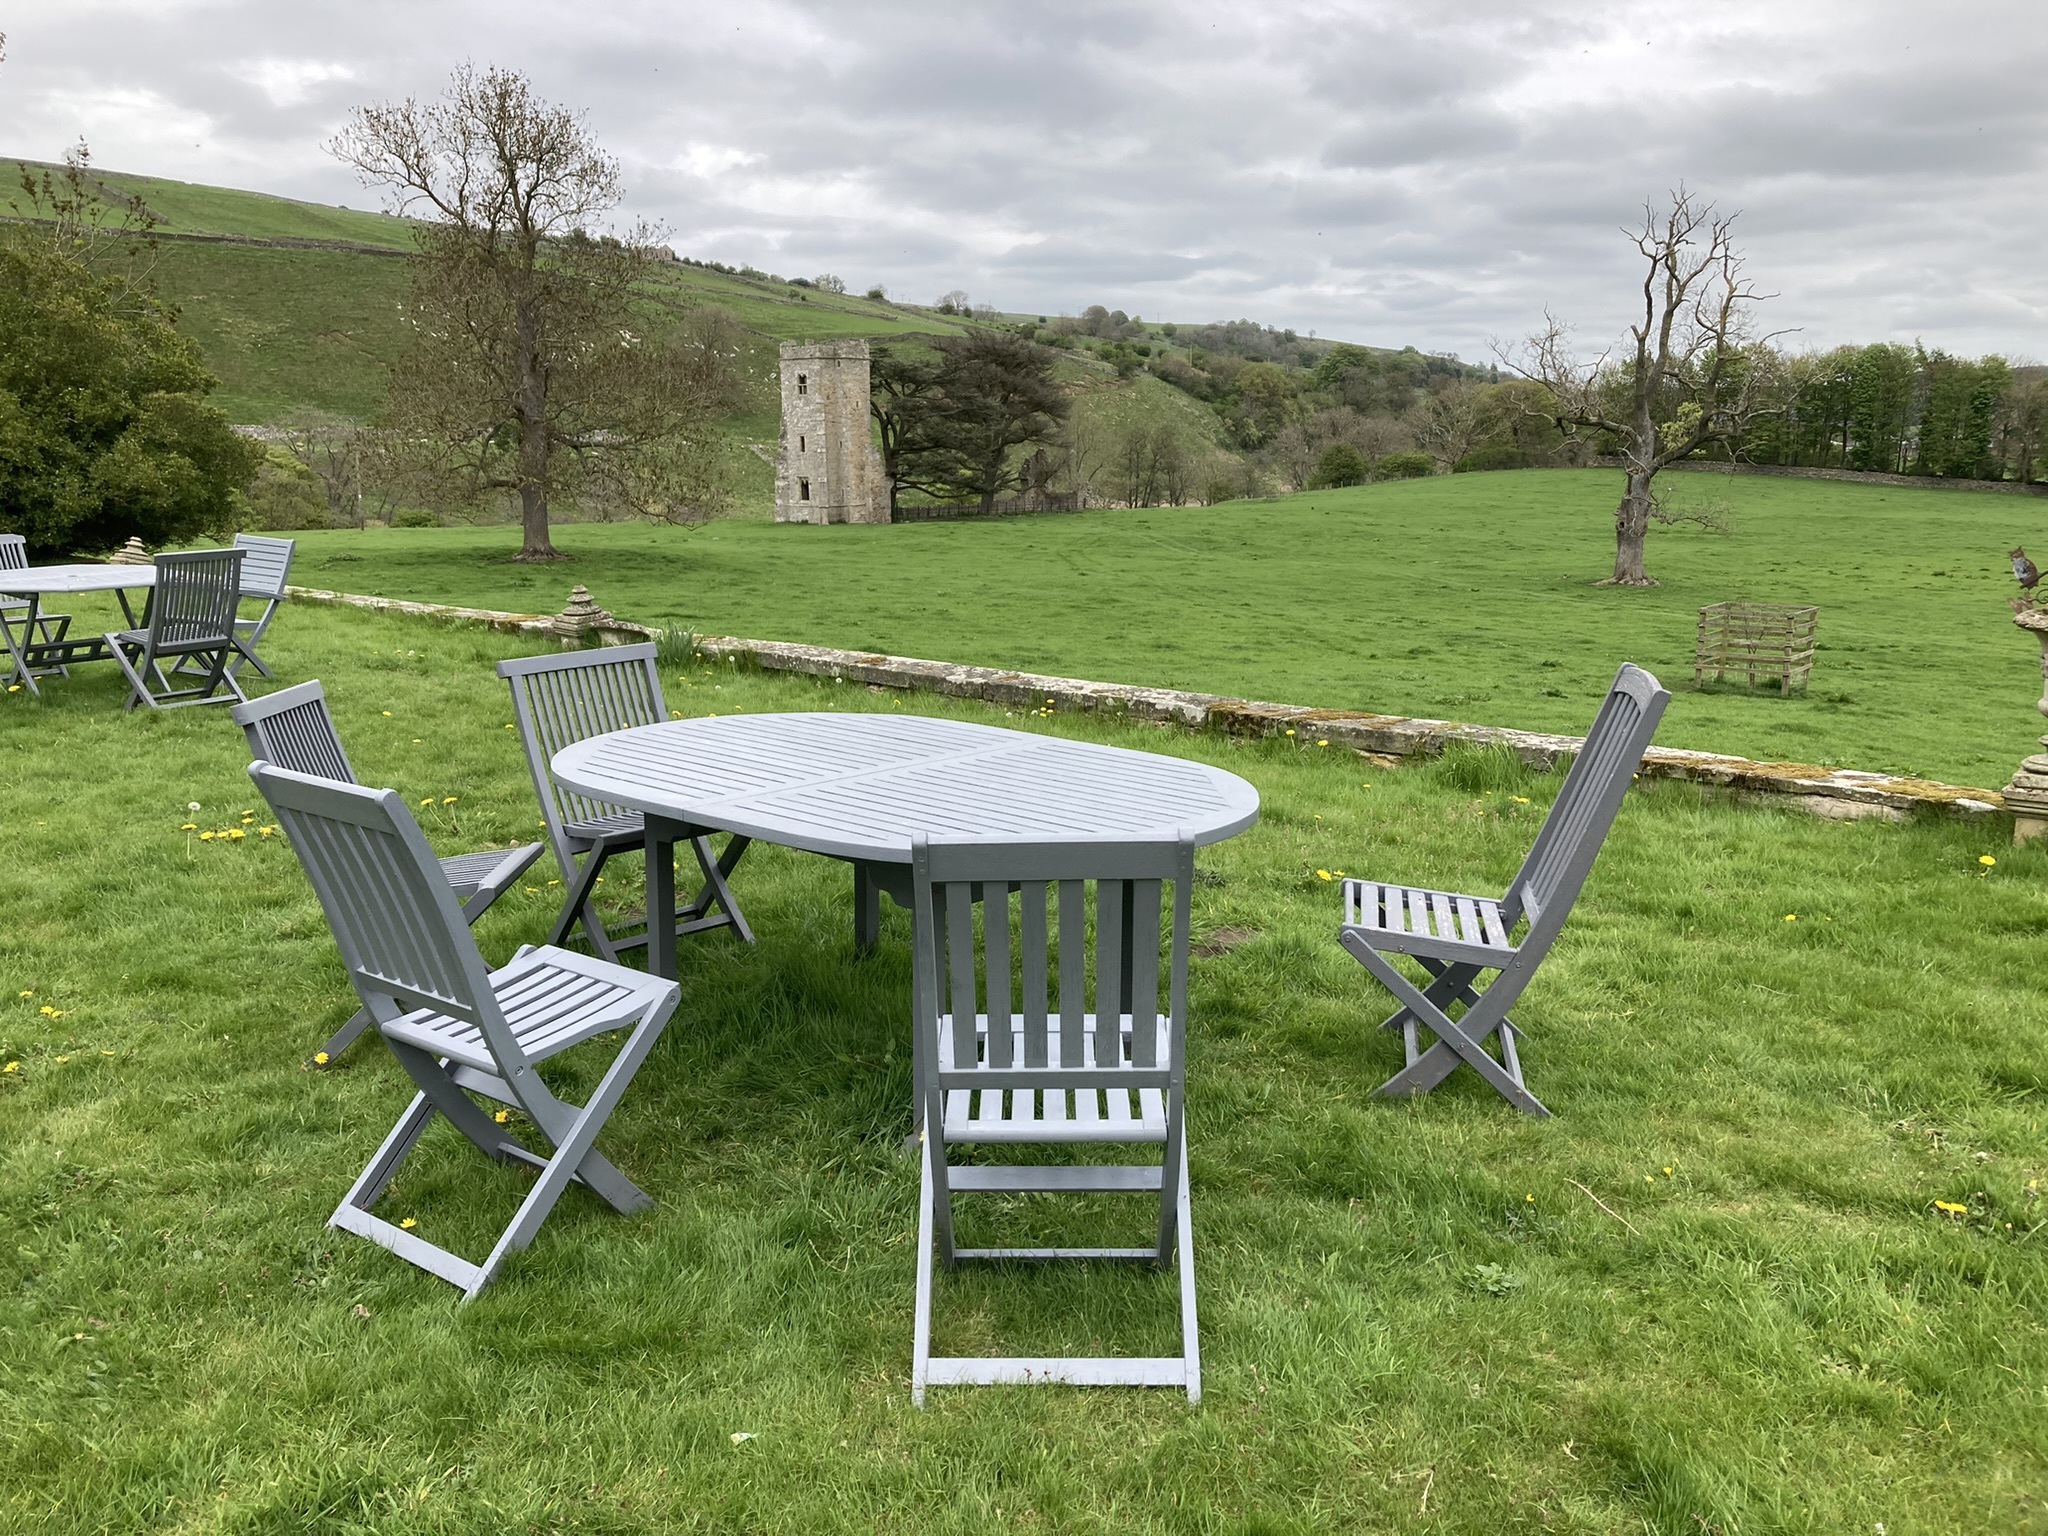 The latest tearoom in the dales - with the greatest view?